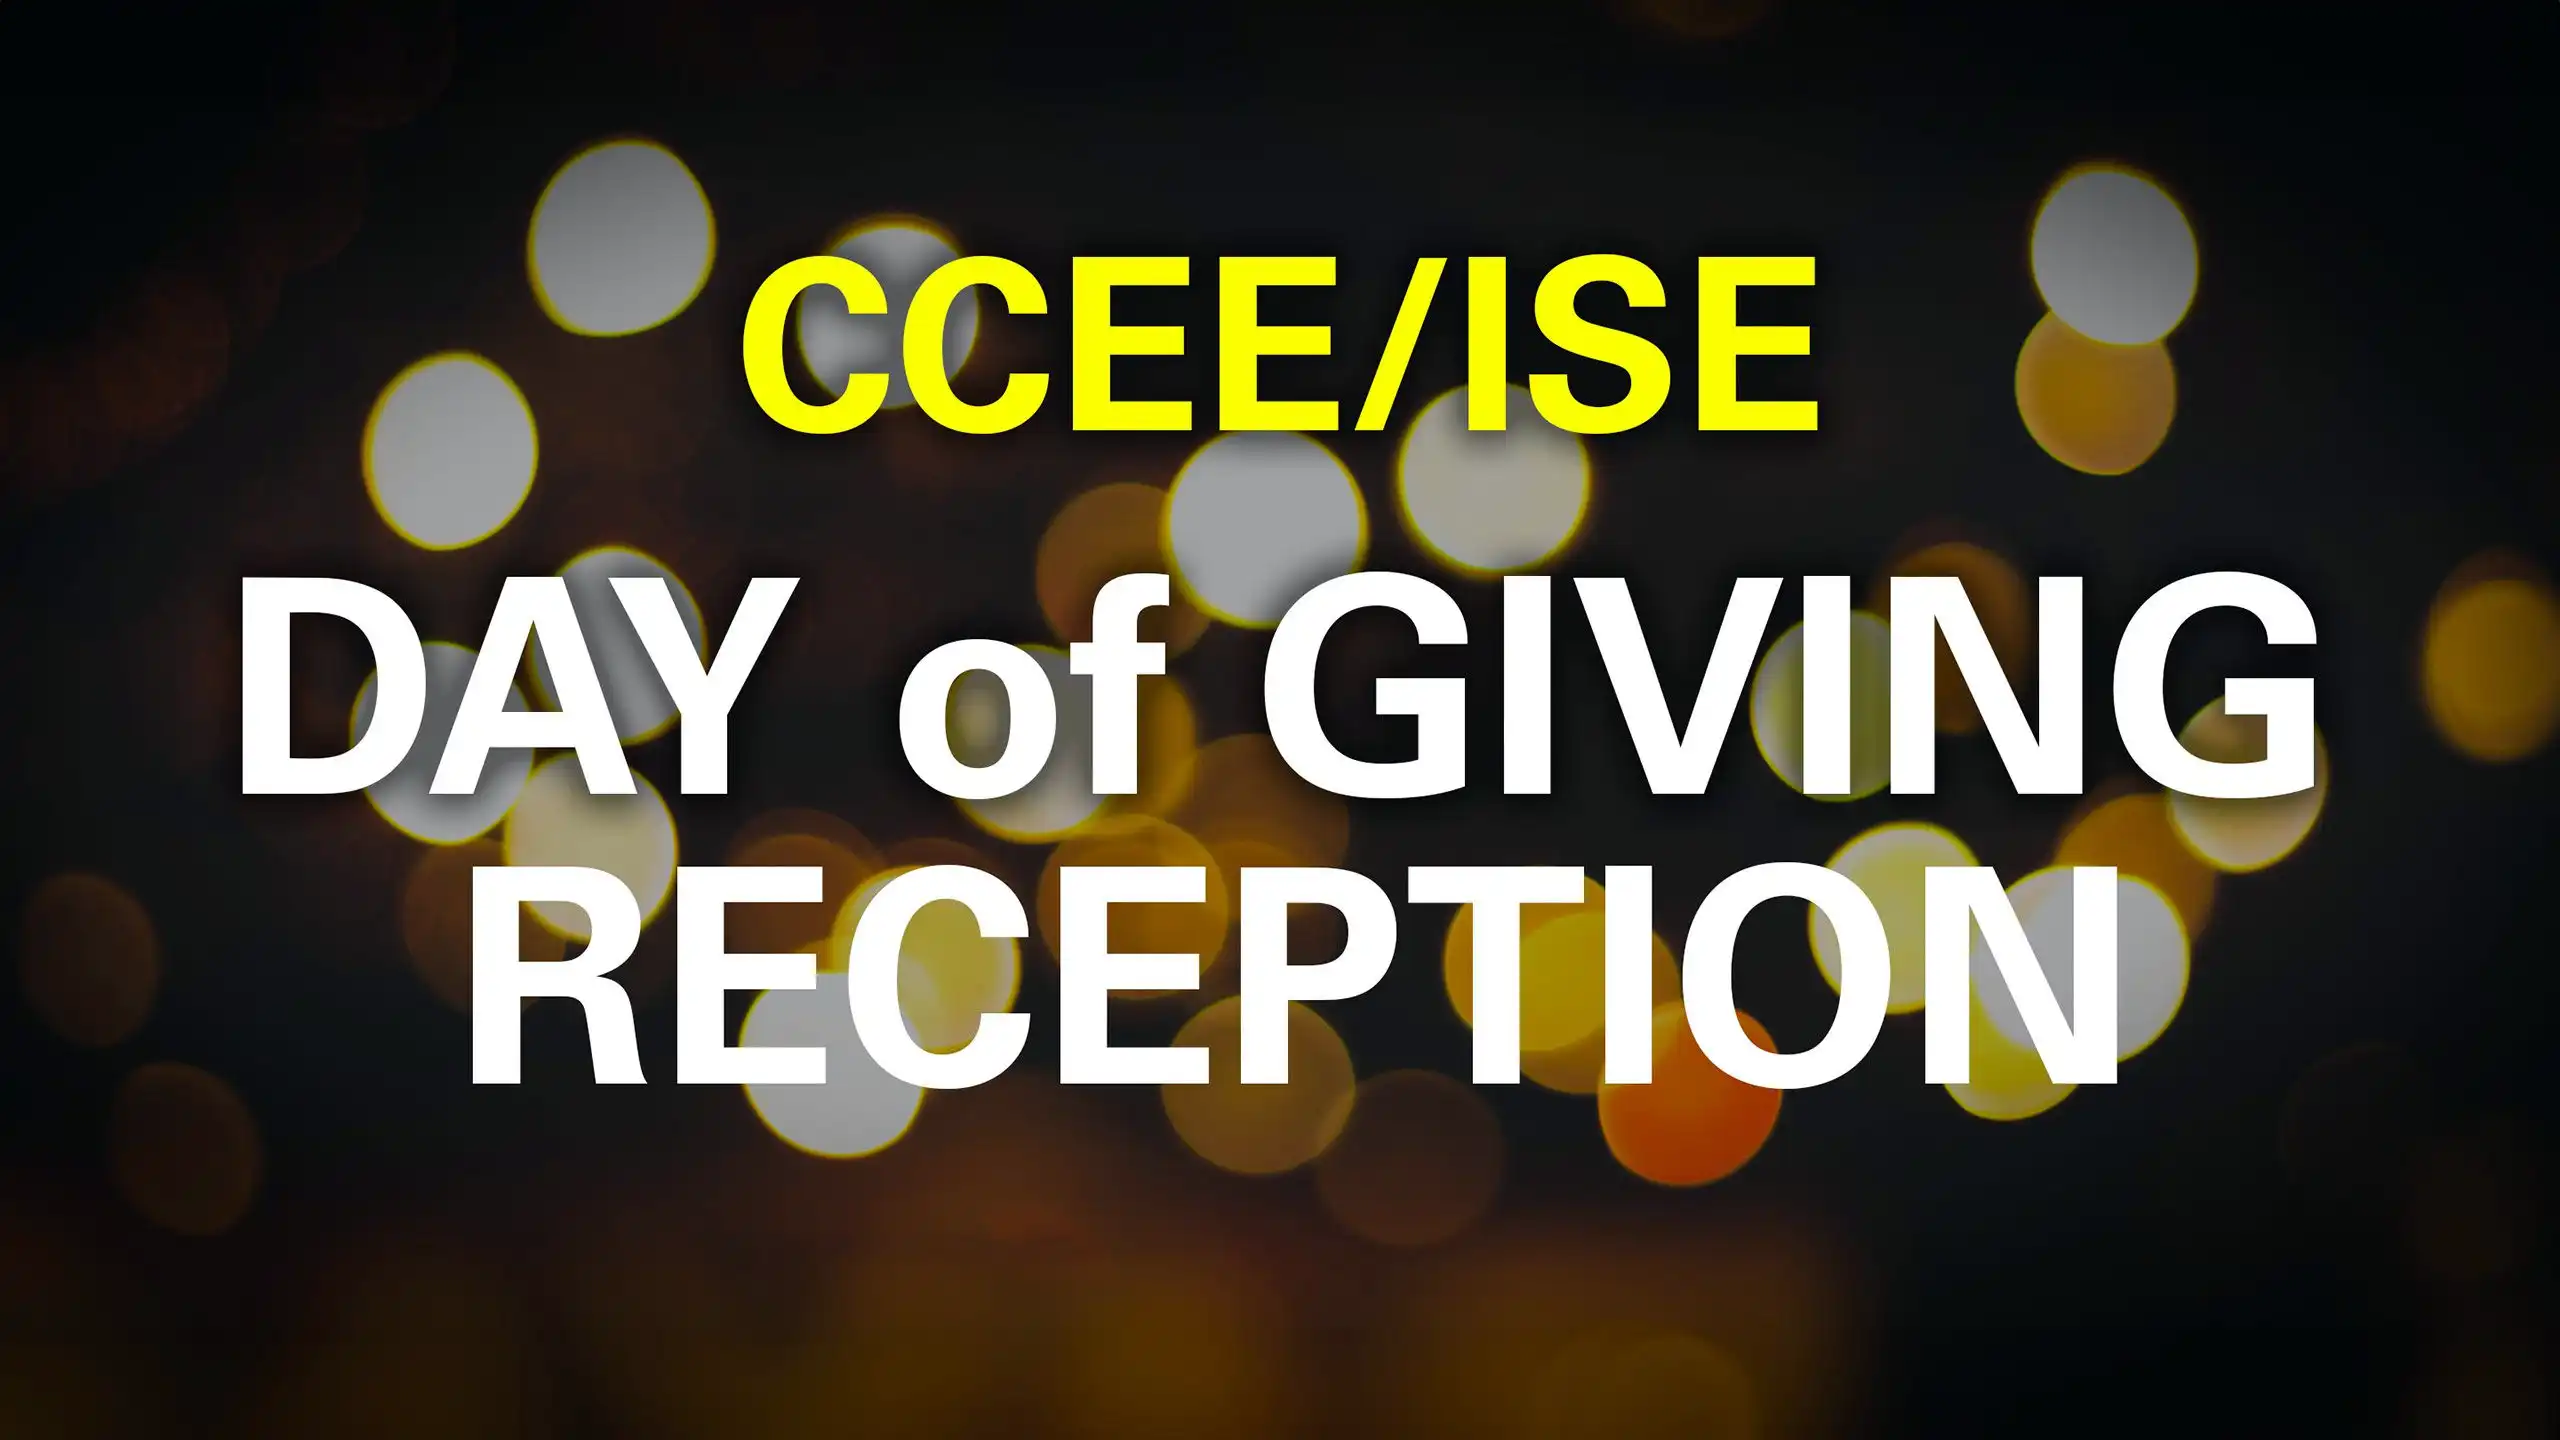 The words CCEE/ISE Day of Giving Reception on a black background.